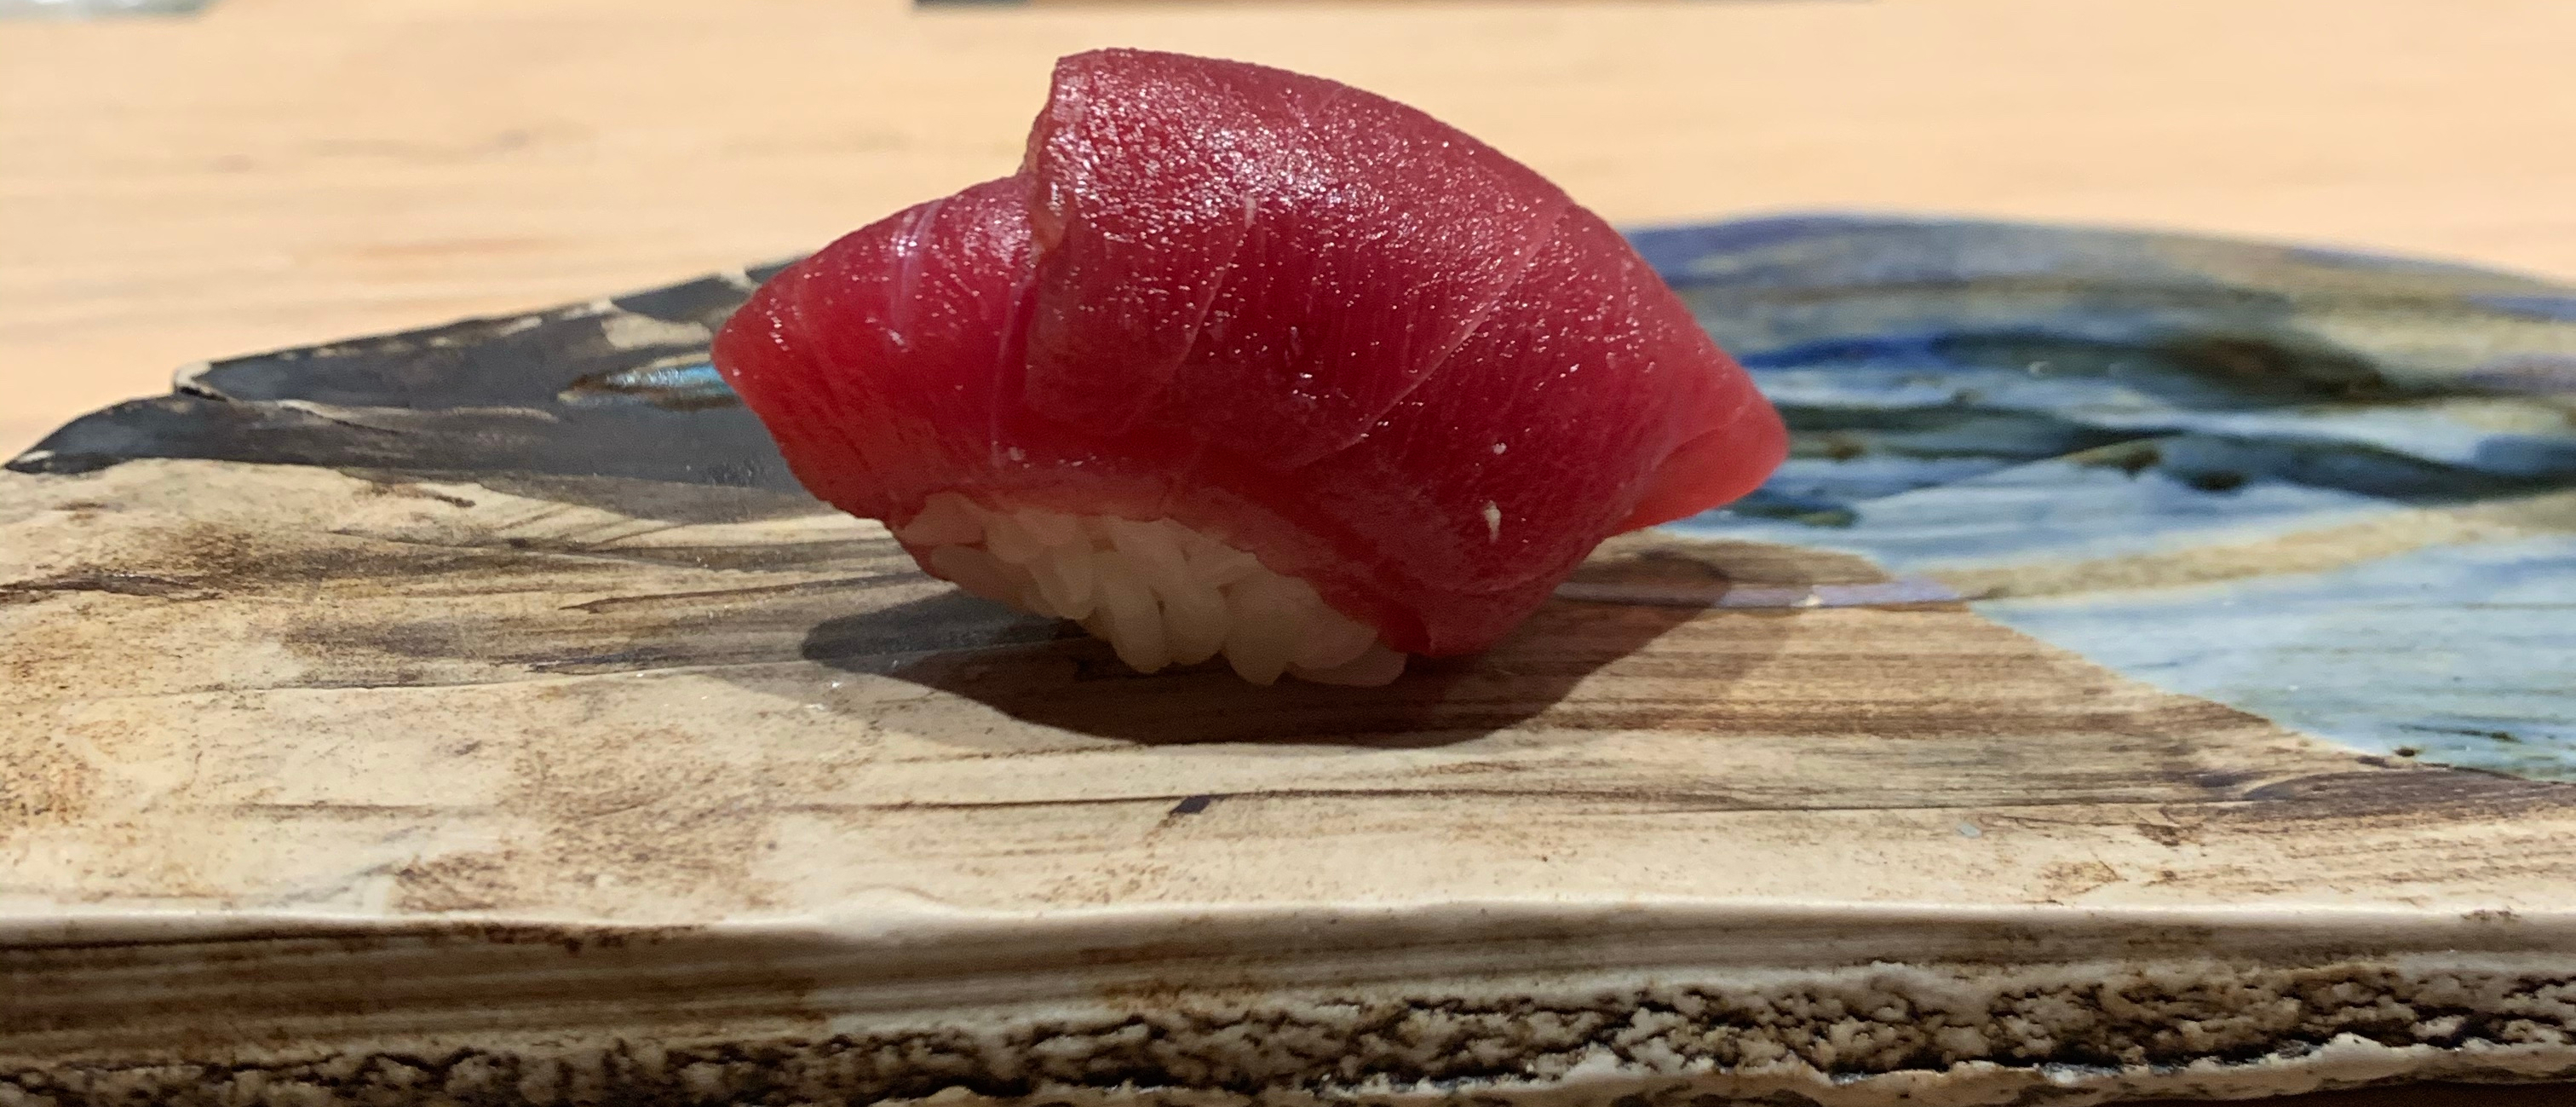 One piece of nigiri sushi, with a deep red fish